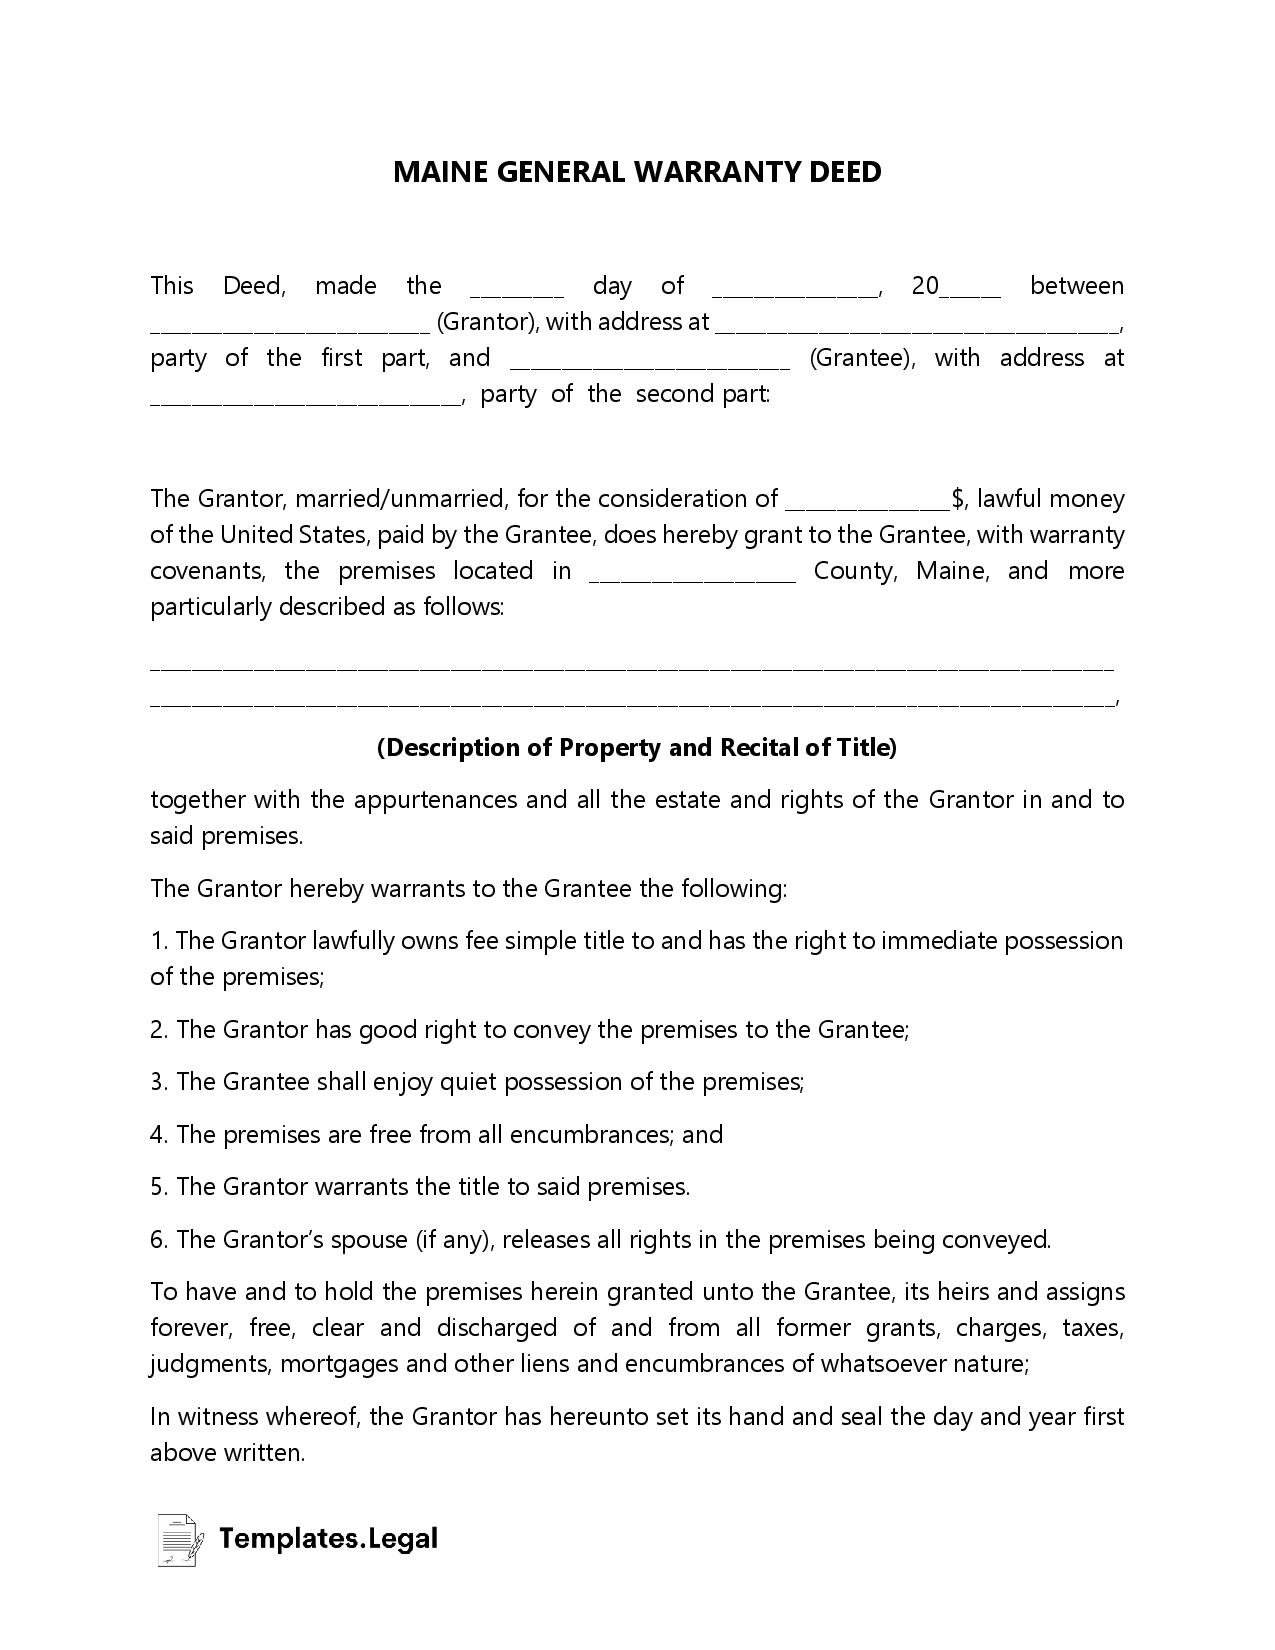 Maine General Warranty Deed - Templates.Legal